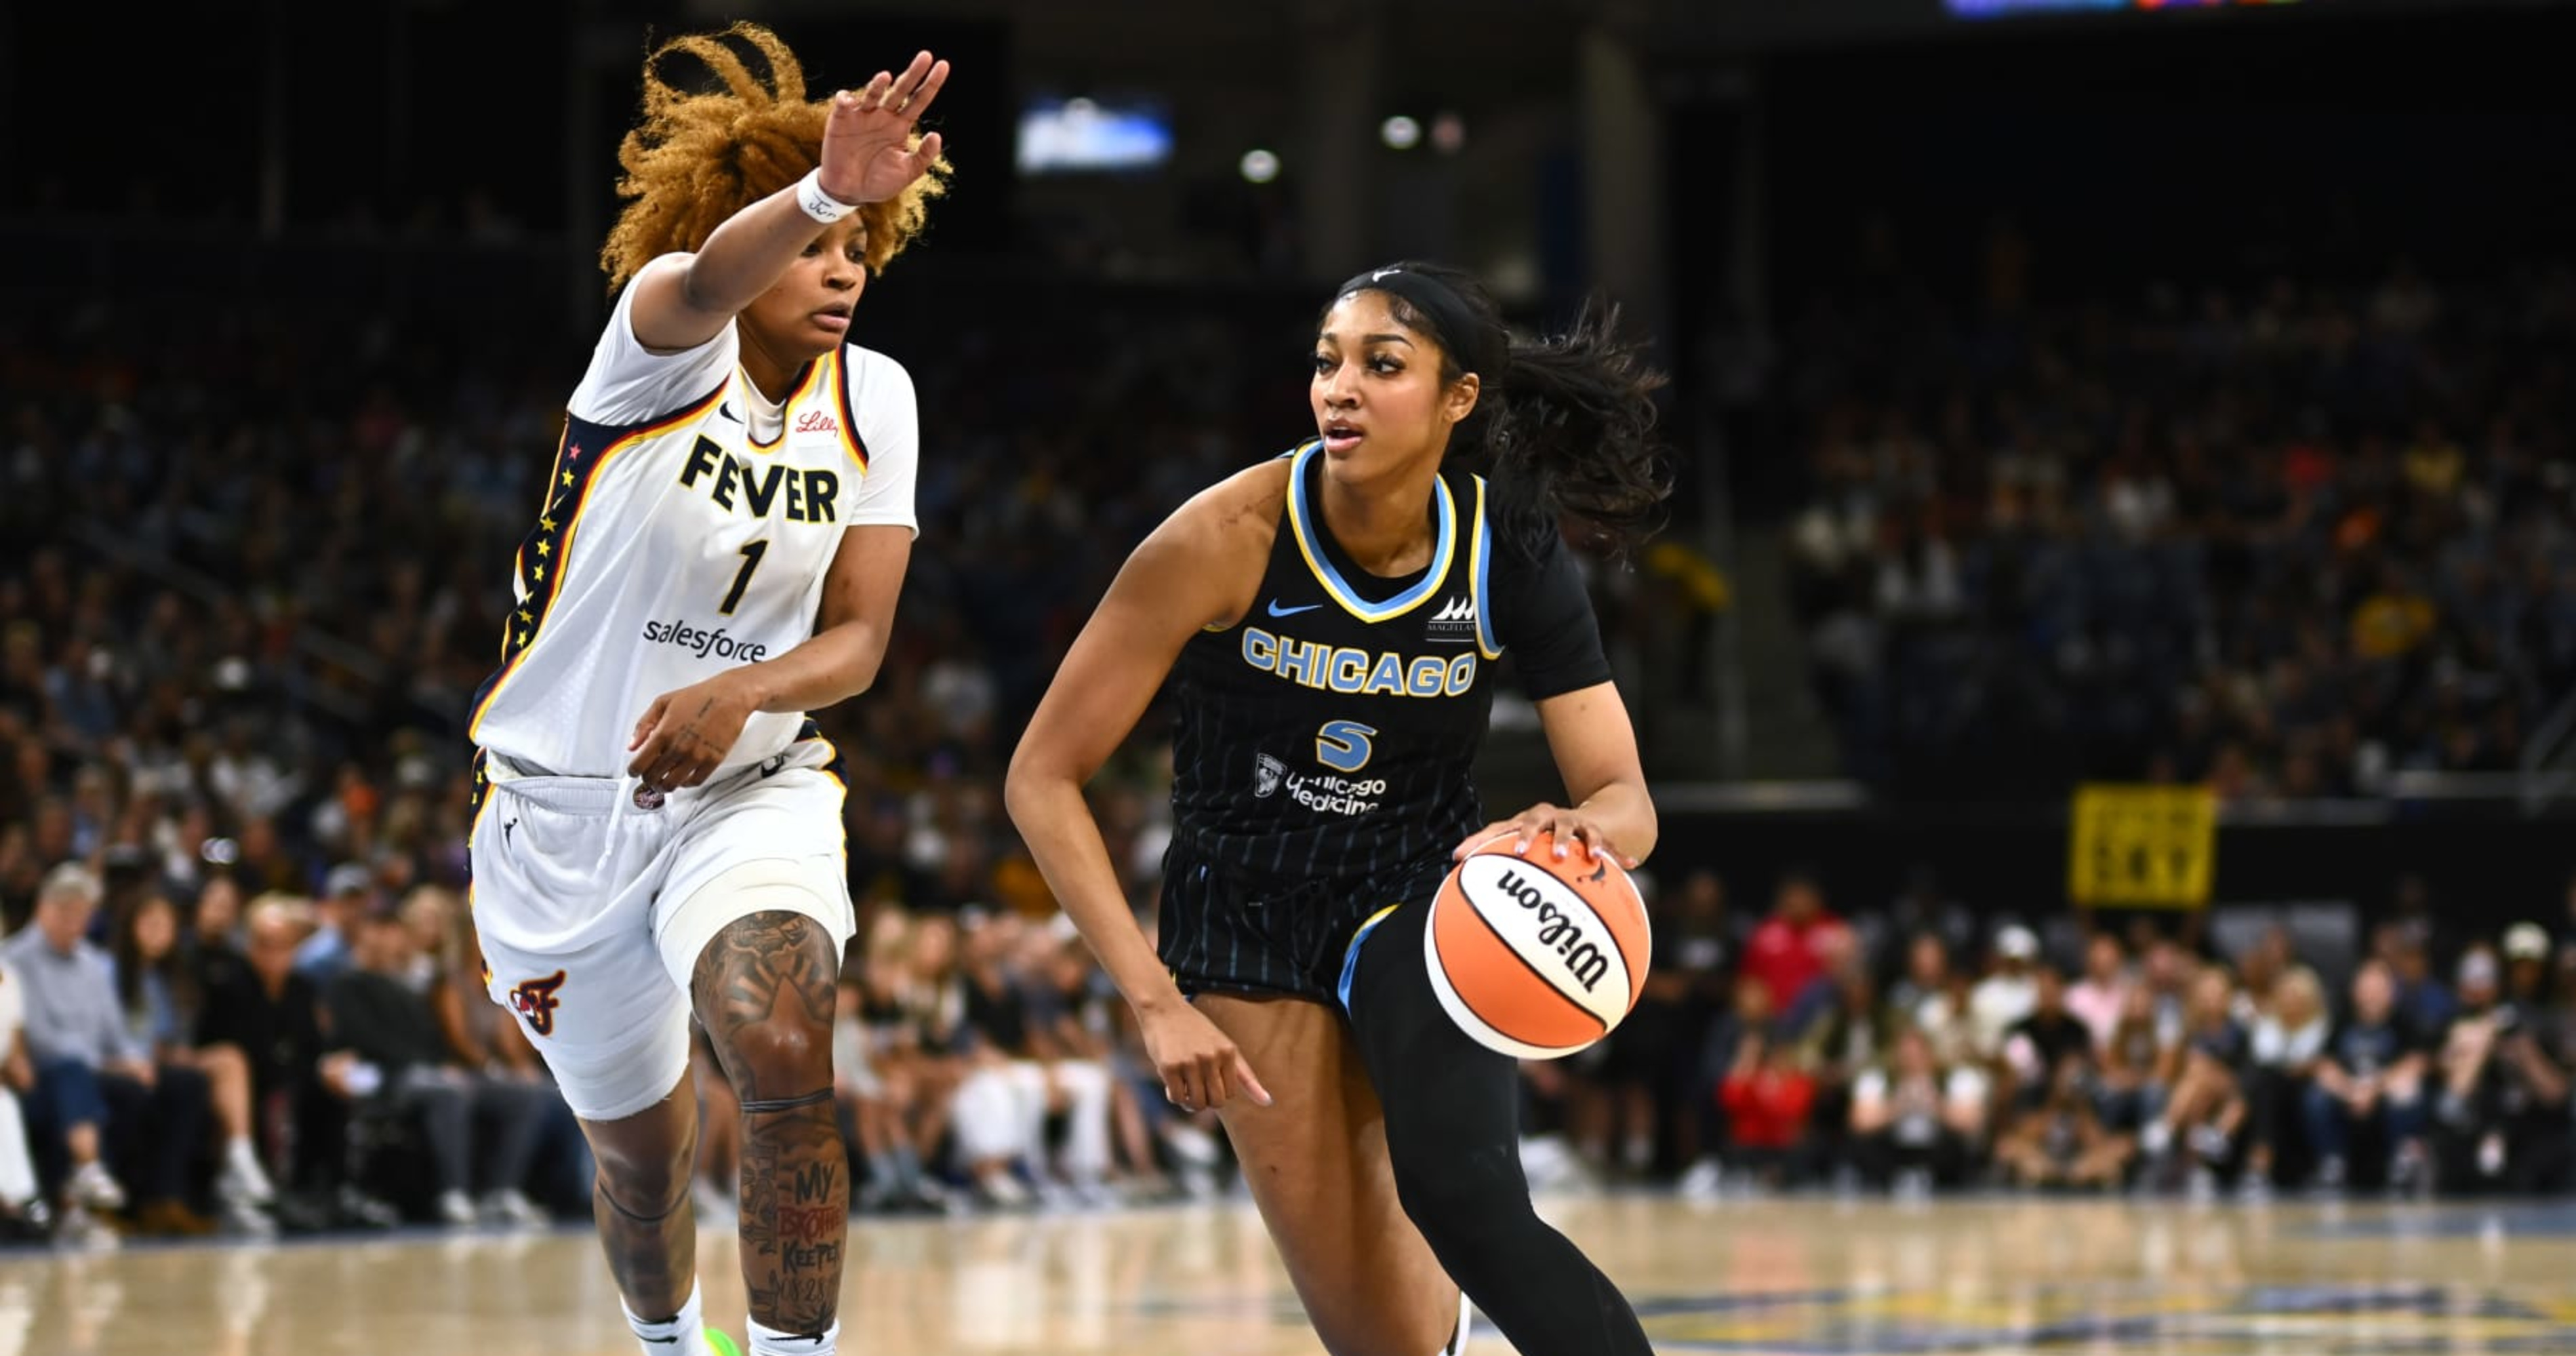 Angel Reese: 'Good for Women's Sports' as Jalen Brunson, Chance, More Watch Sky-Fever